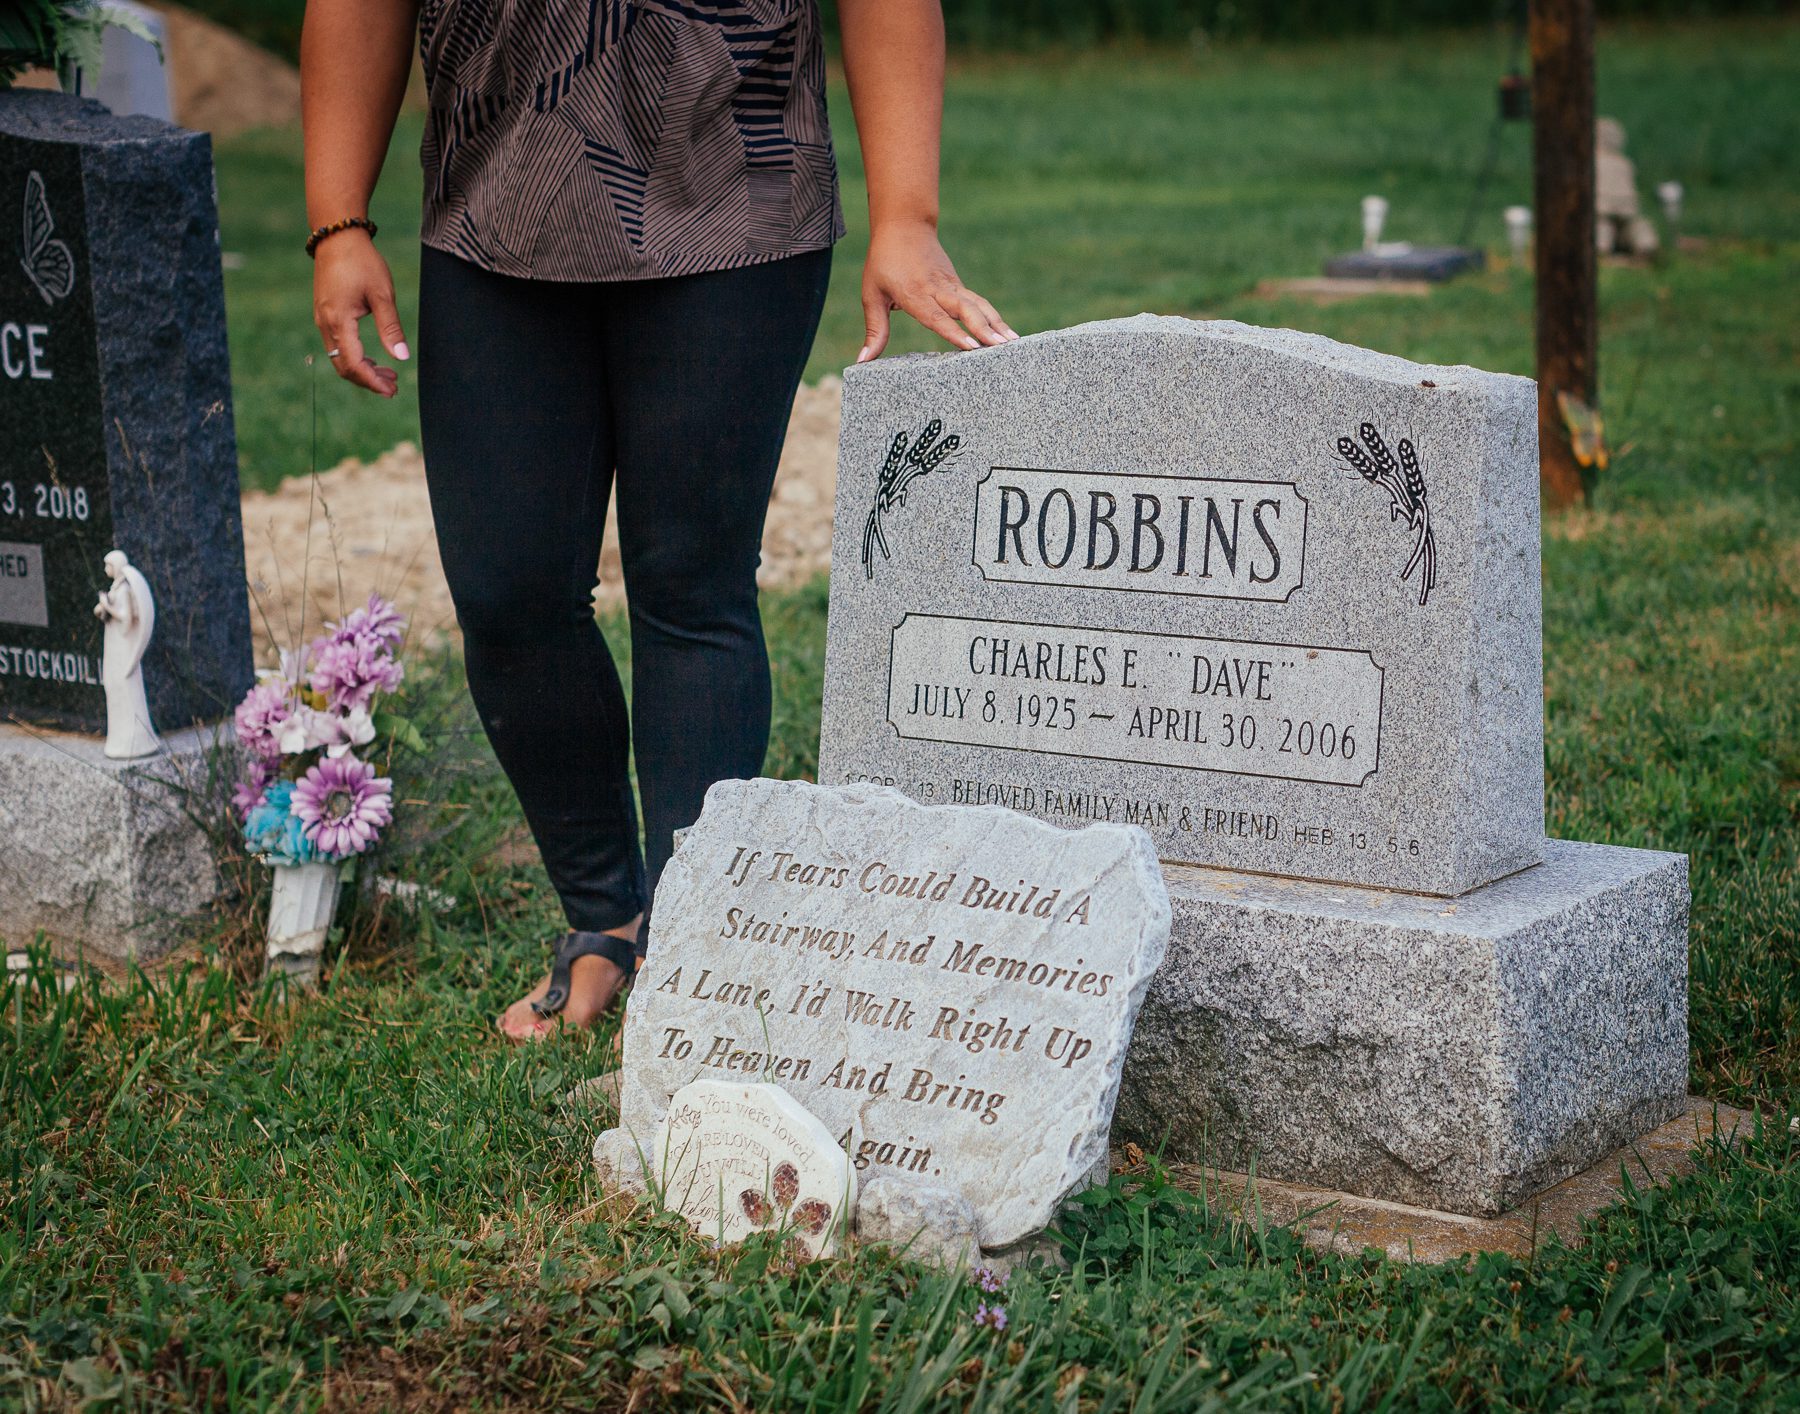 All of Michelle’s ancestors on the Robbins side are buried in the North Buxton cemetery. Michelle’s grandfather Charles taught the family how to look after horses, and Michelle grew up grooming and feeding and riding.